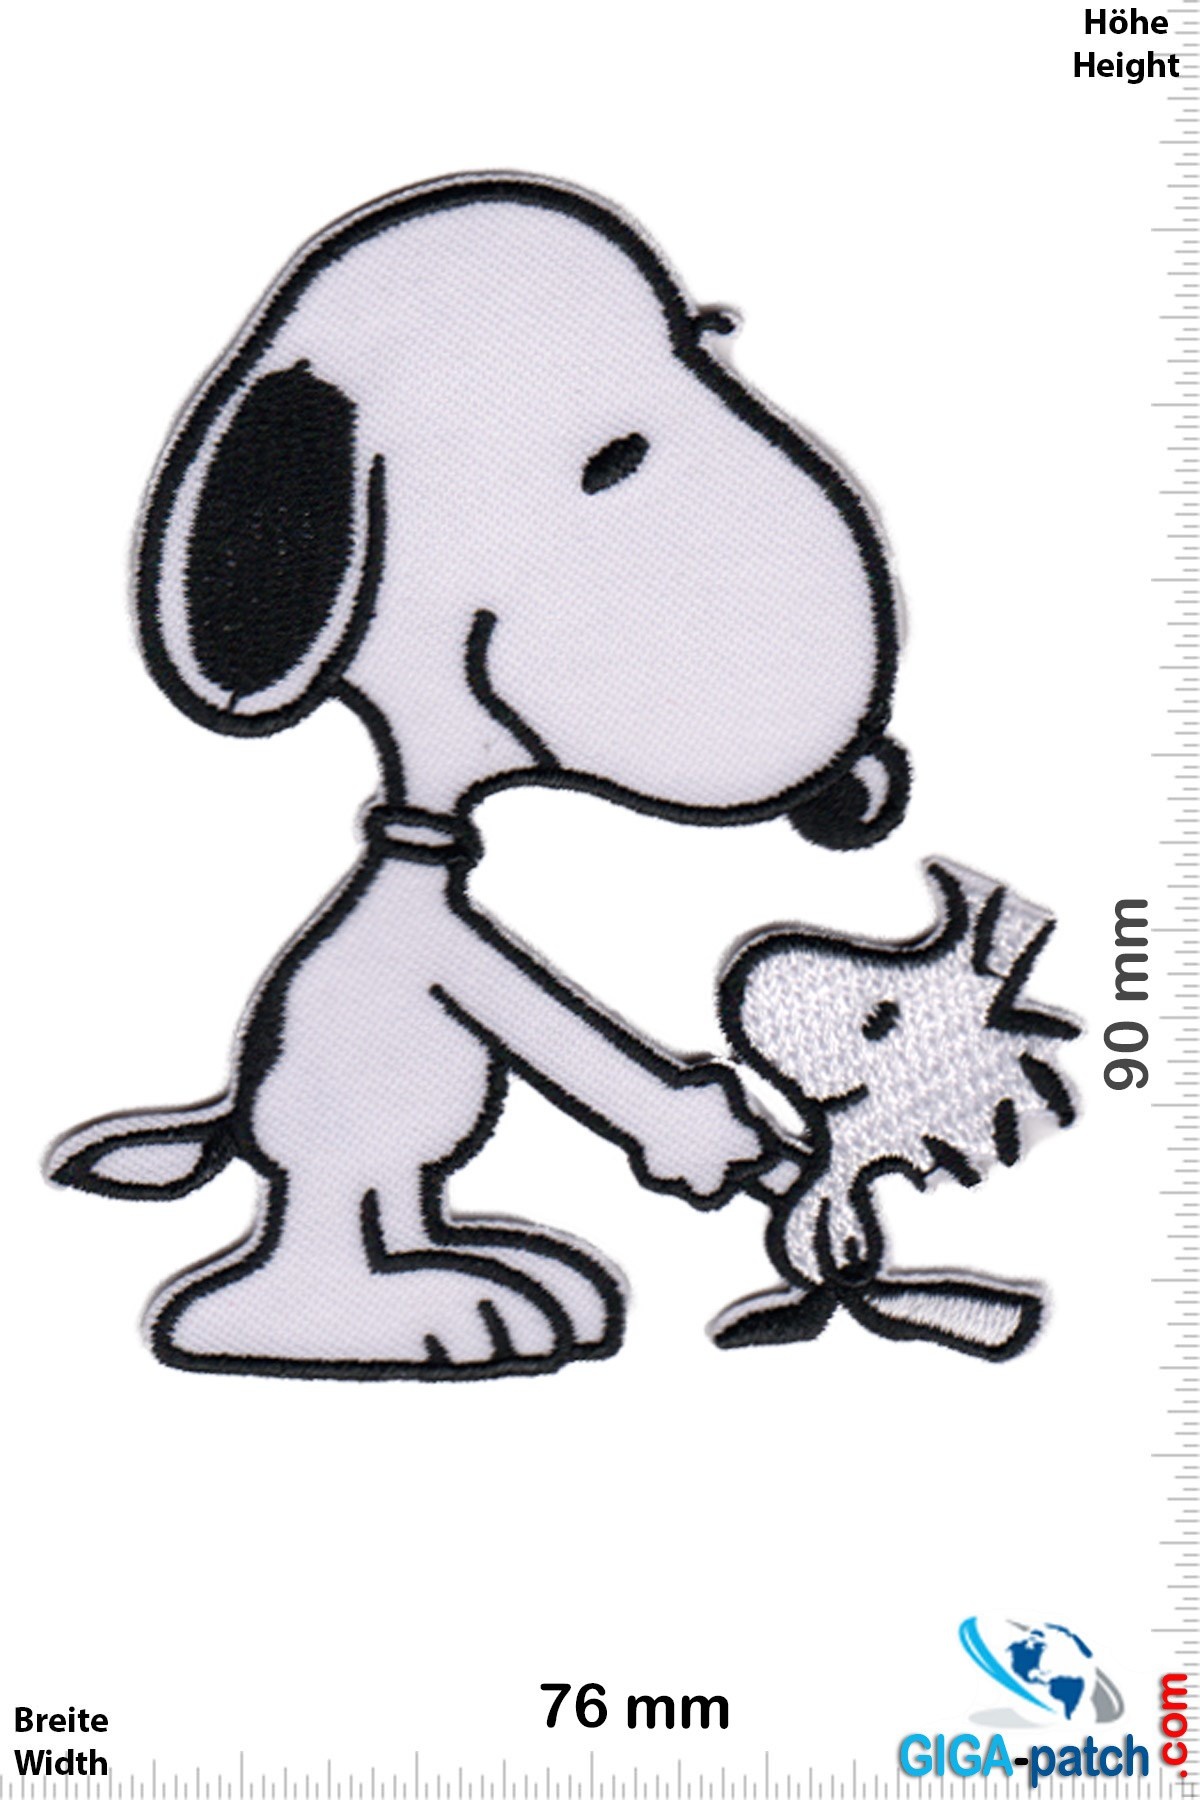 Snoopy Snoopy - shake hands friends - The Peanuts